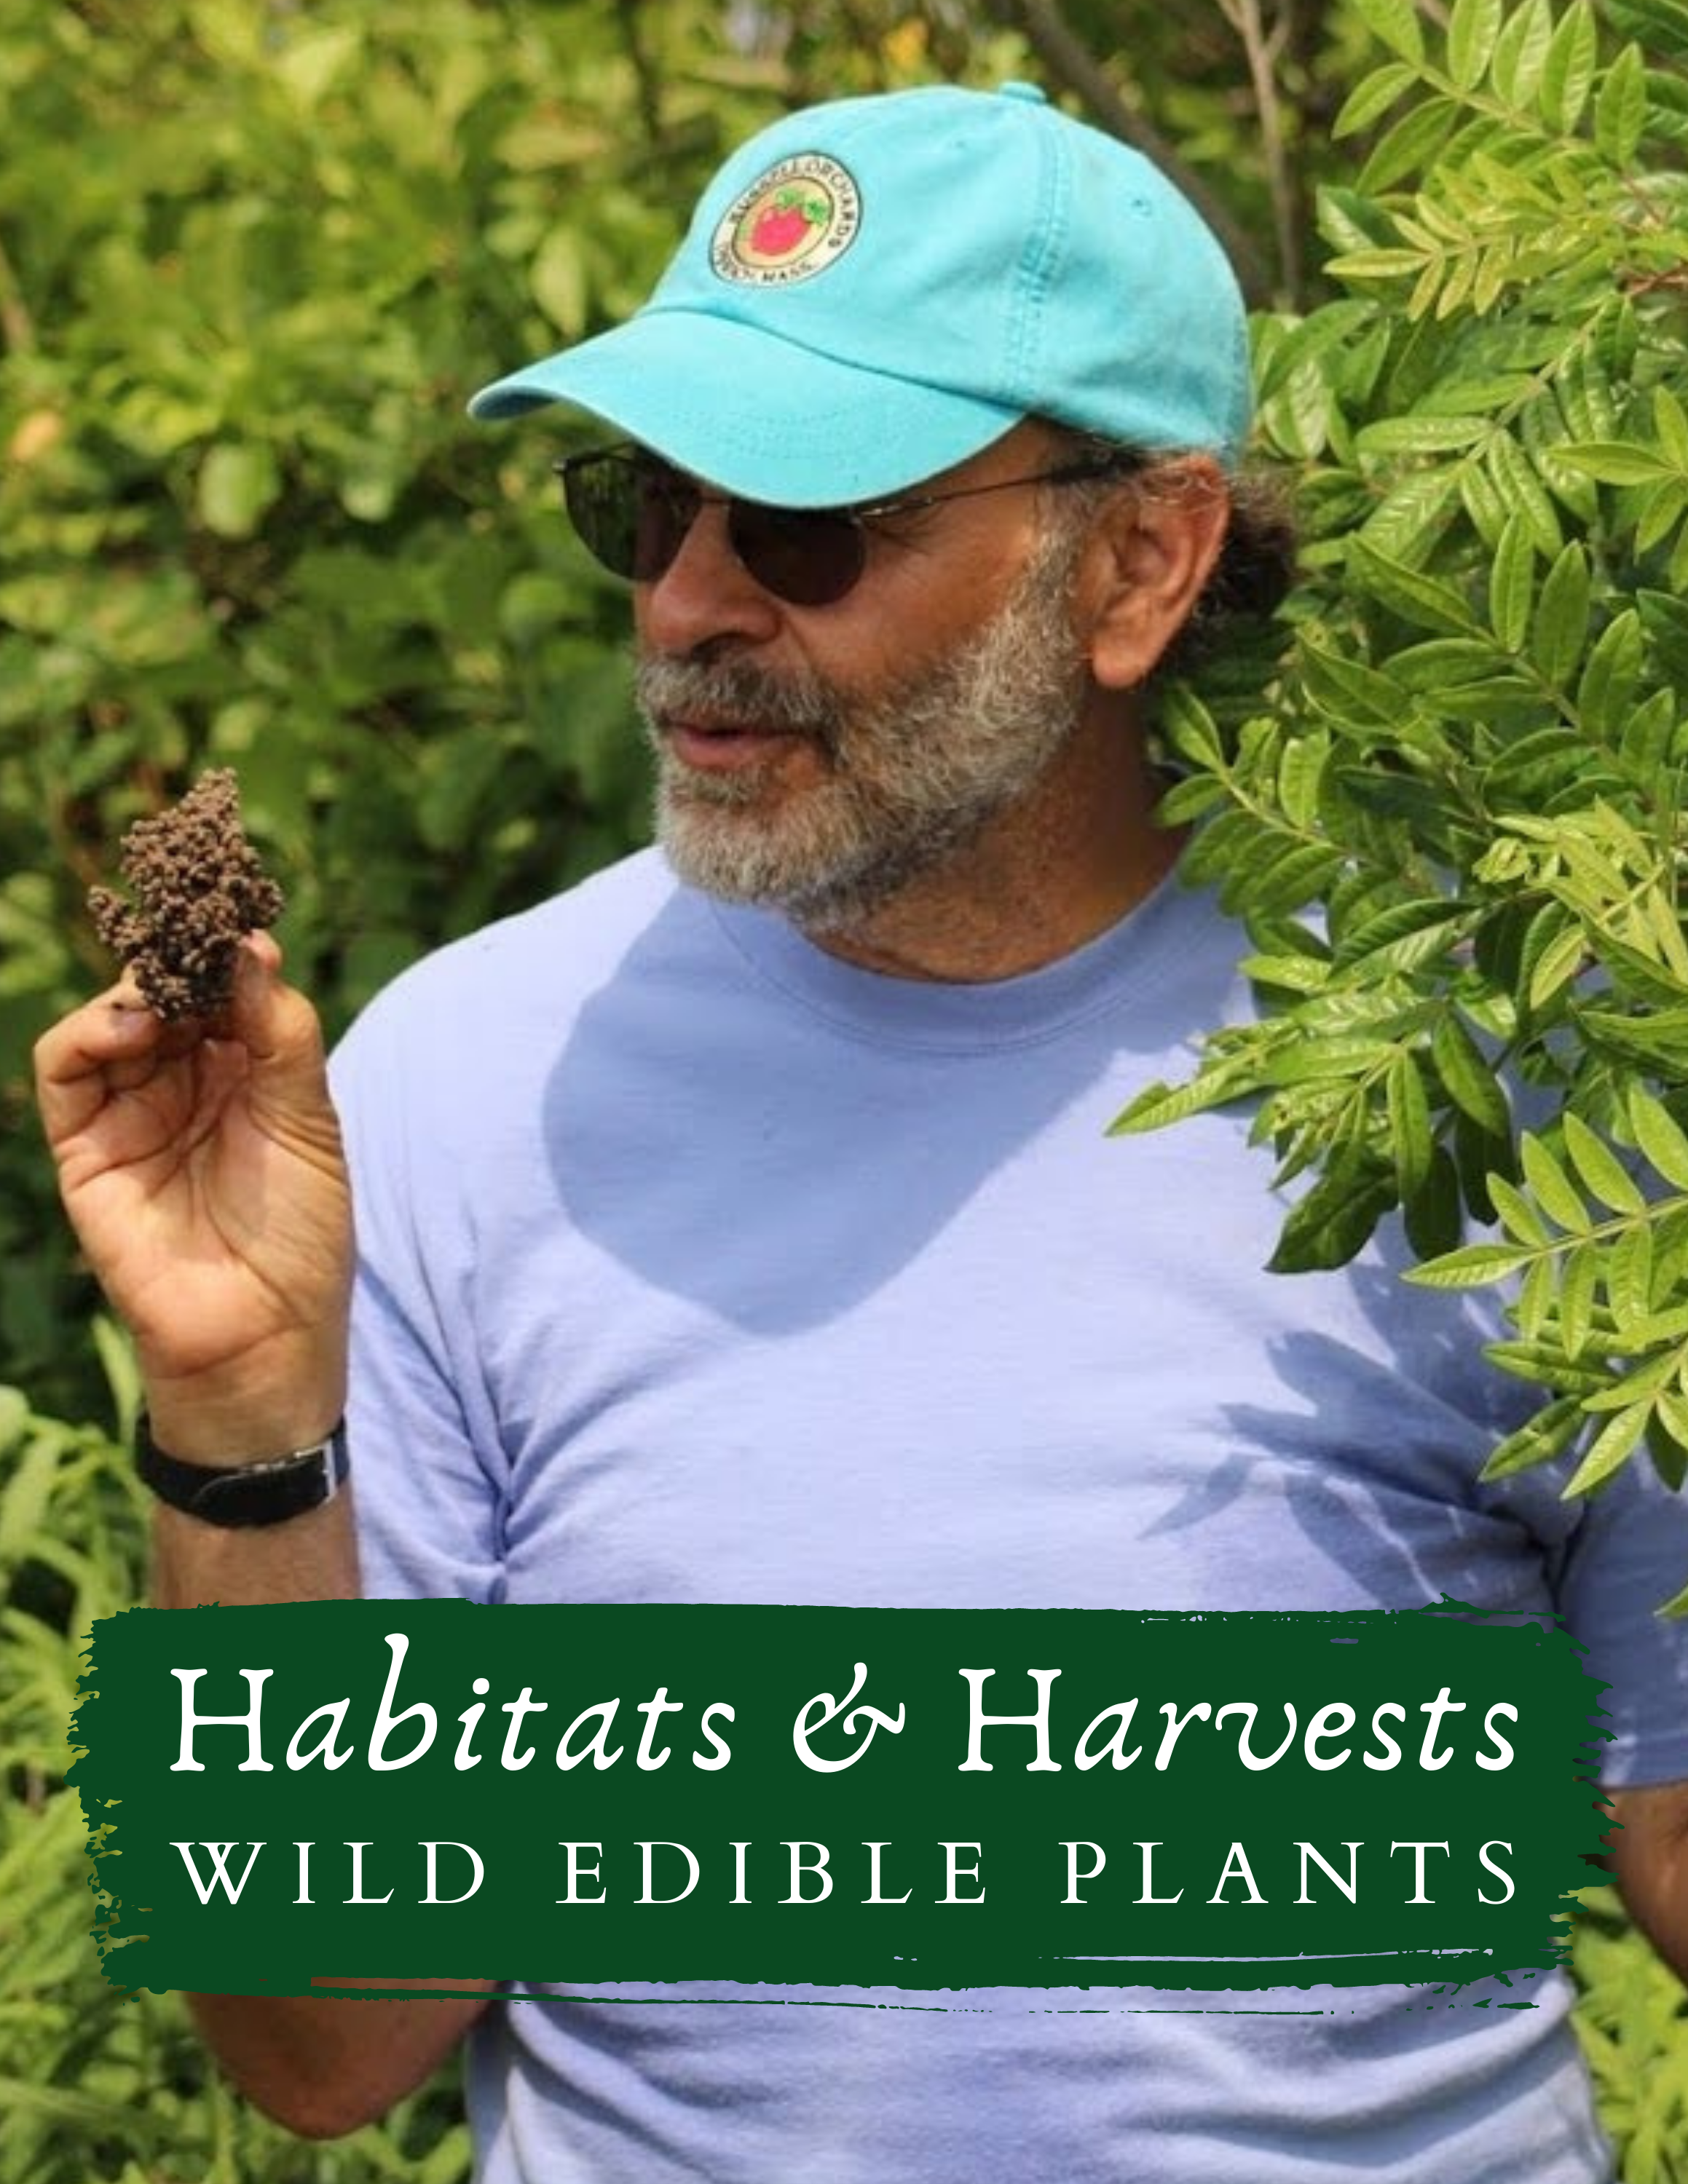 Russ Cohen holding a Pinecone. Text reads: Habitats and Harvests - Wild Edible Plants.